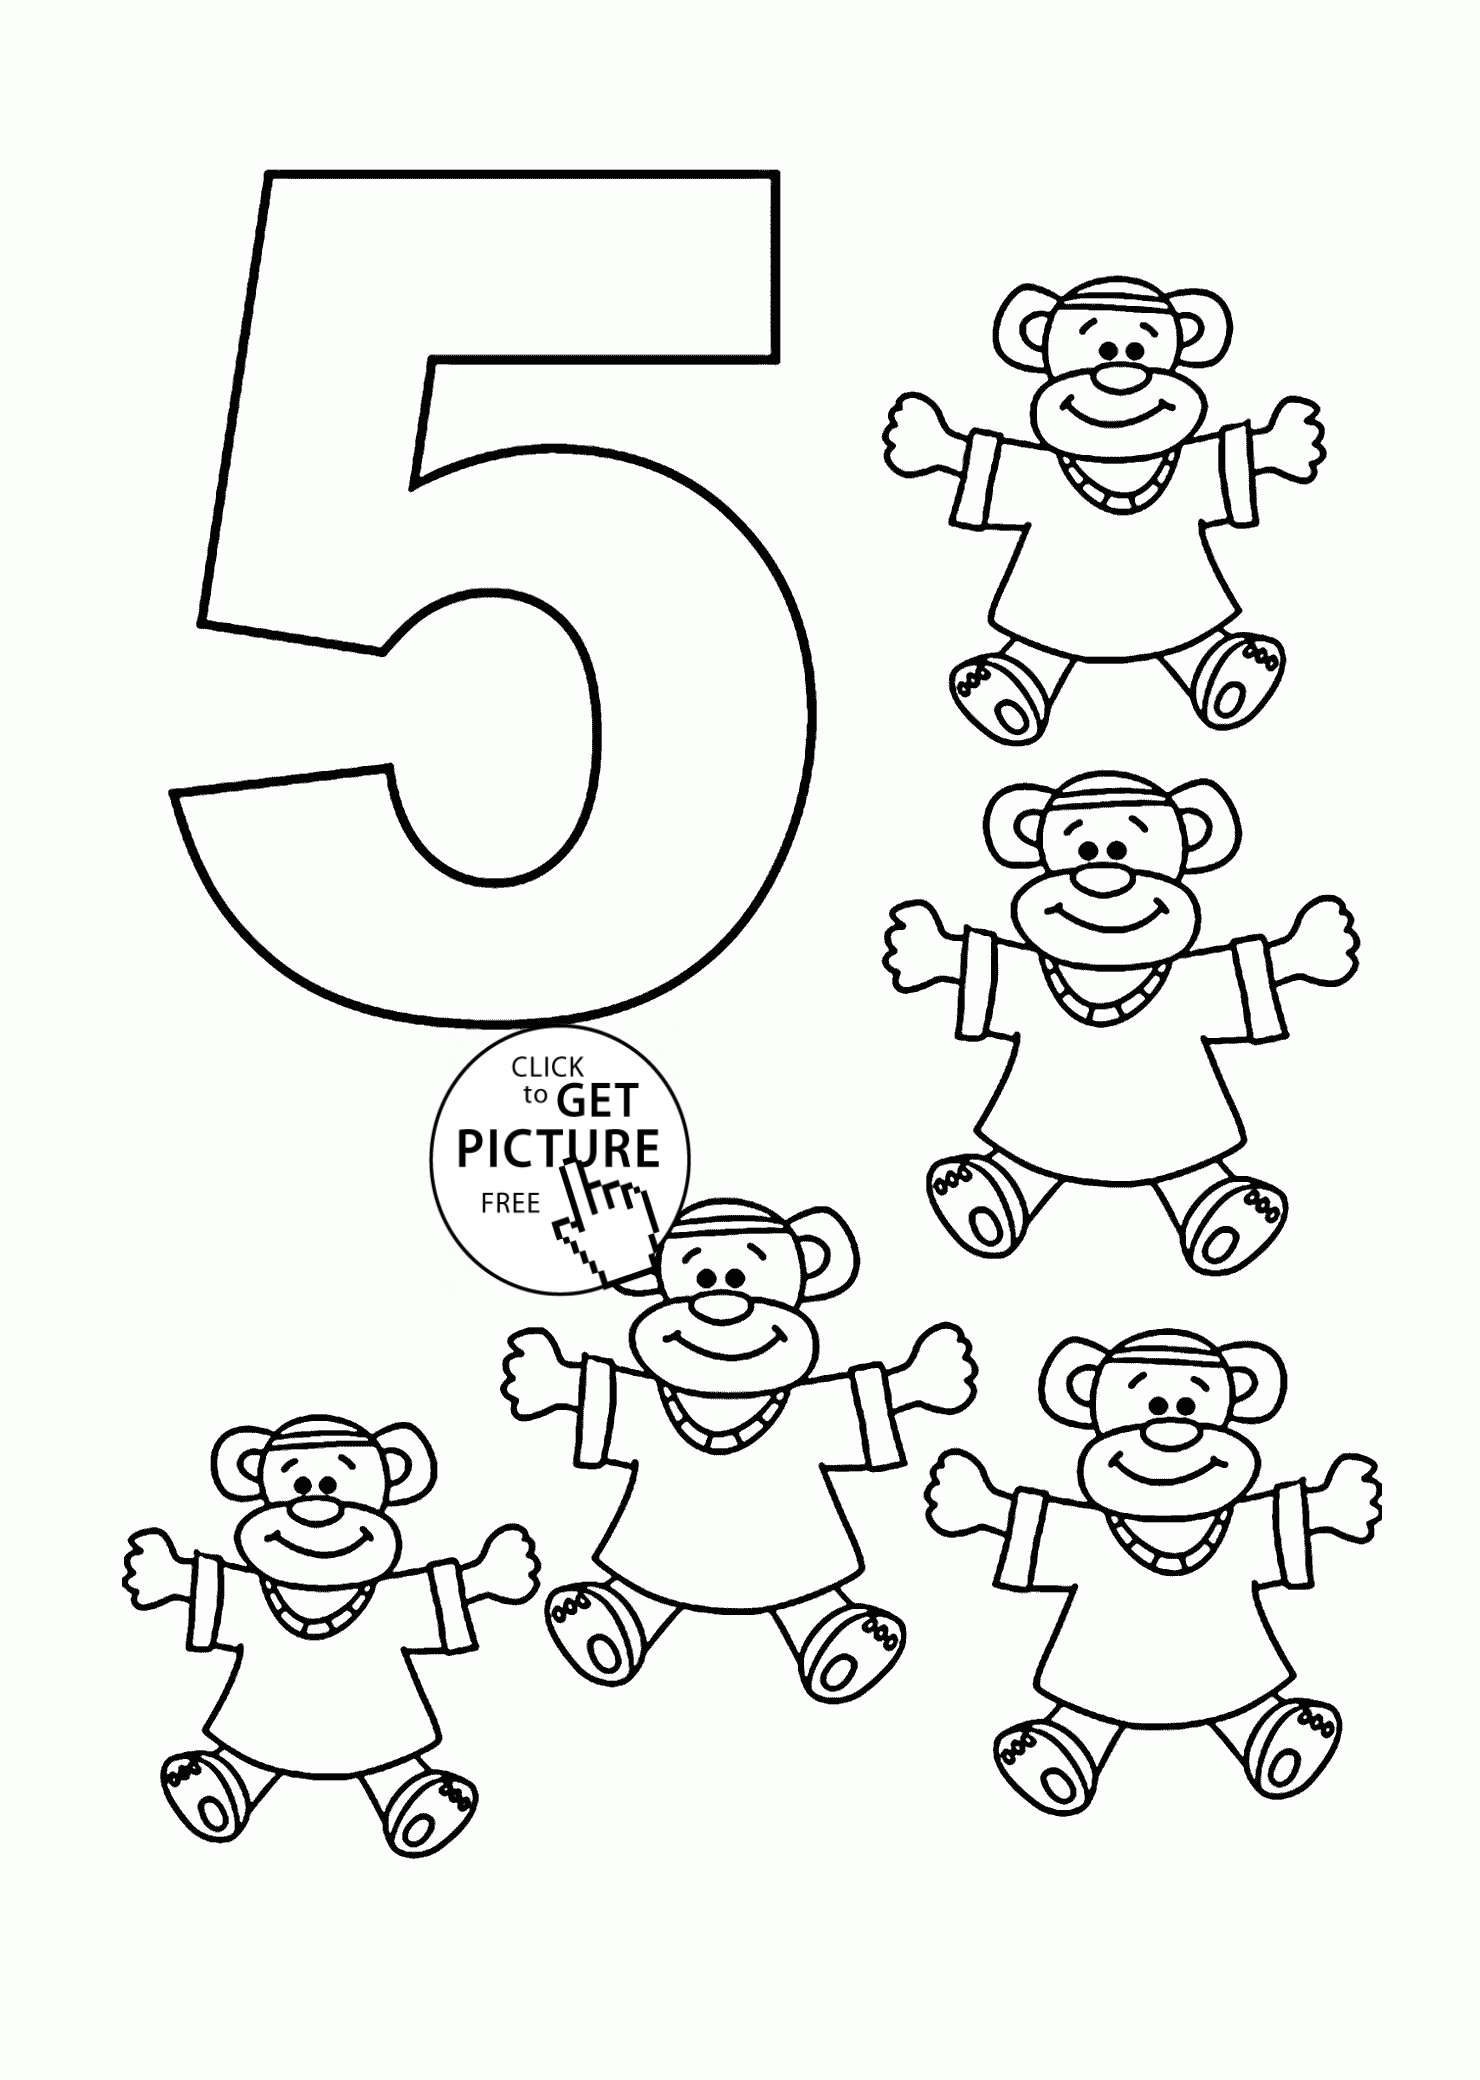 Number 5 coloring pages for kids, counting sheets printables free